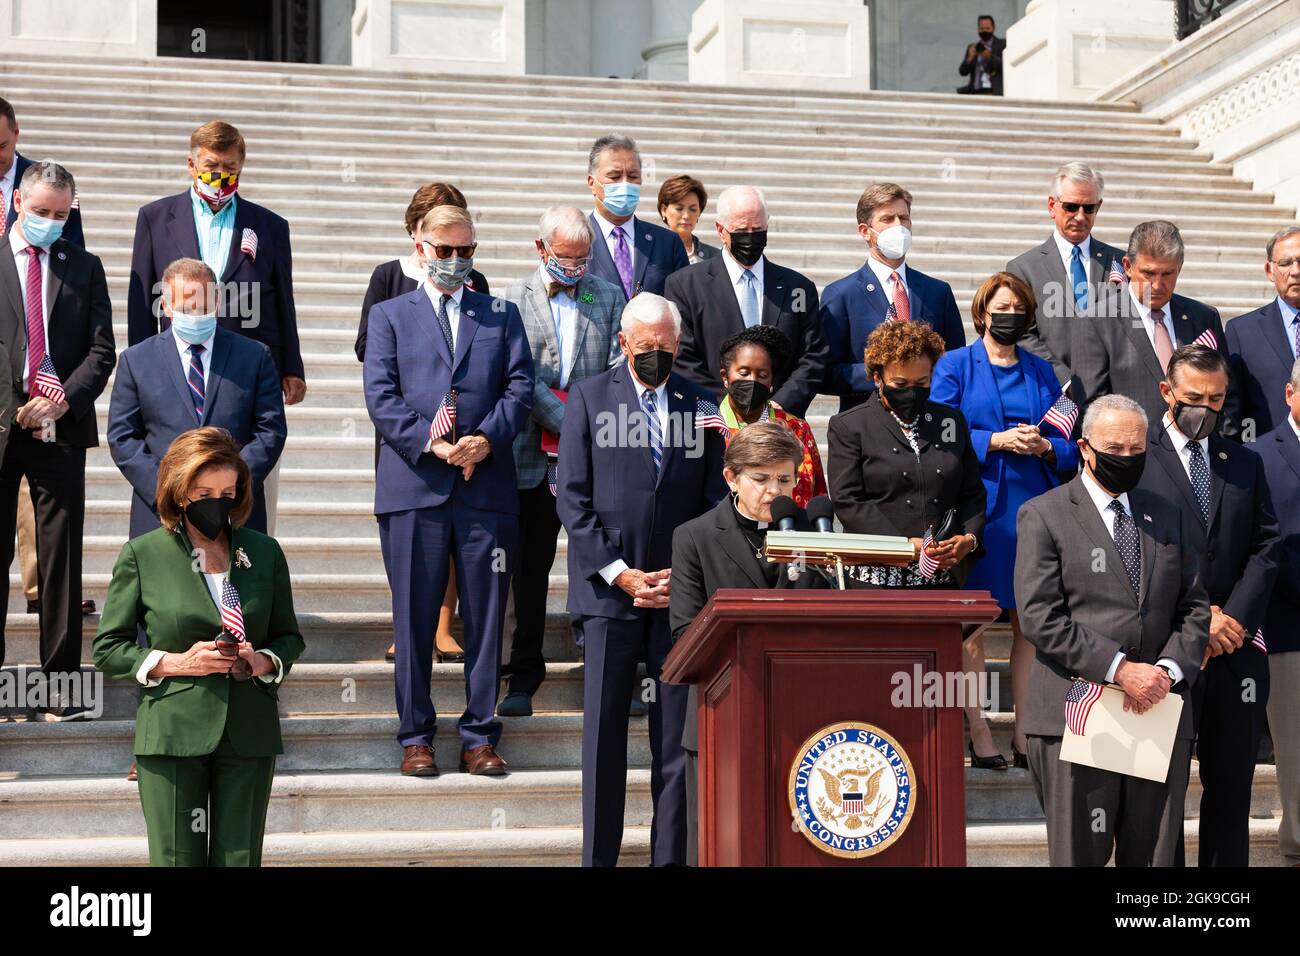 Washington DC, USA. 13th Sep 2021. Members of Congress bow their heads in prayer during a ceremony on the Capitol steps in remembrance of the victims of the September 11th attacks. Credit: Allison Bailey/Alamy Live News Stock Photo